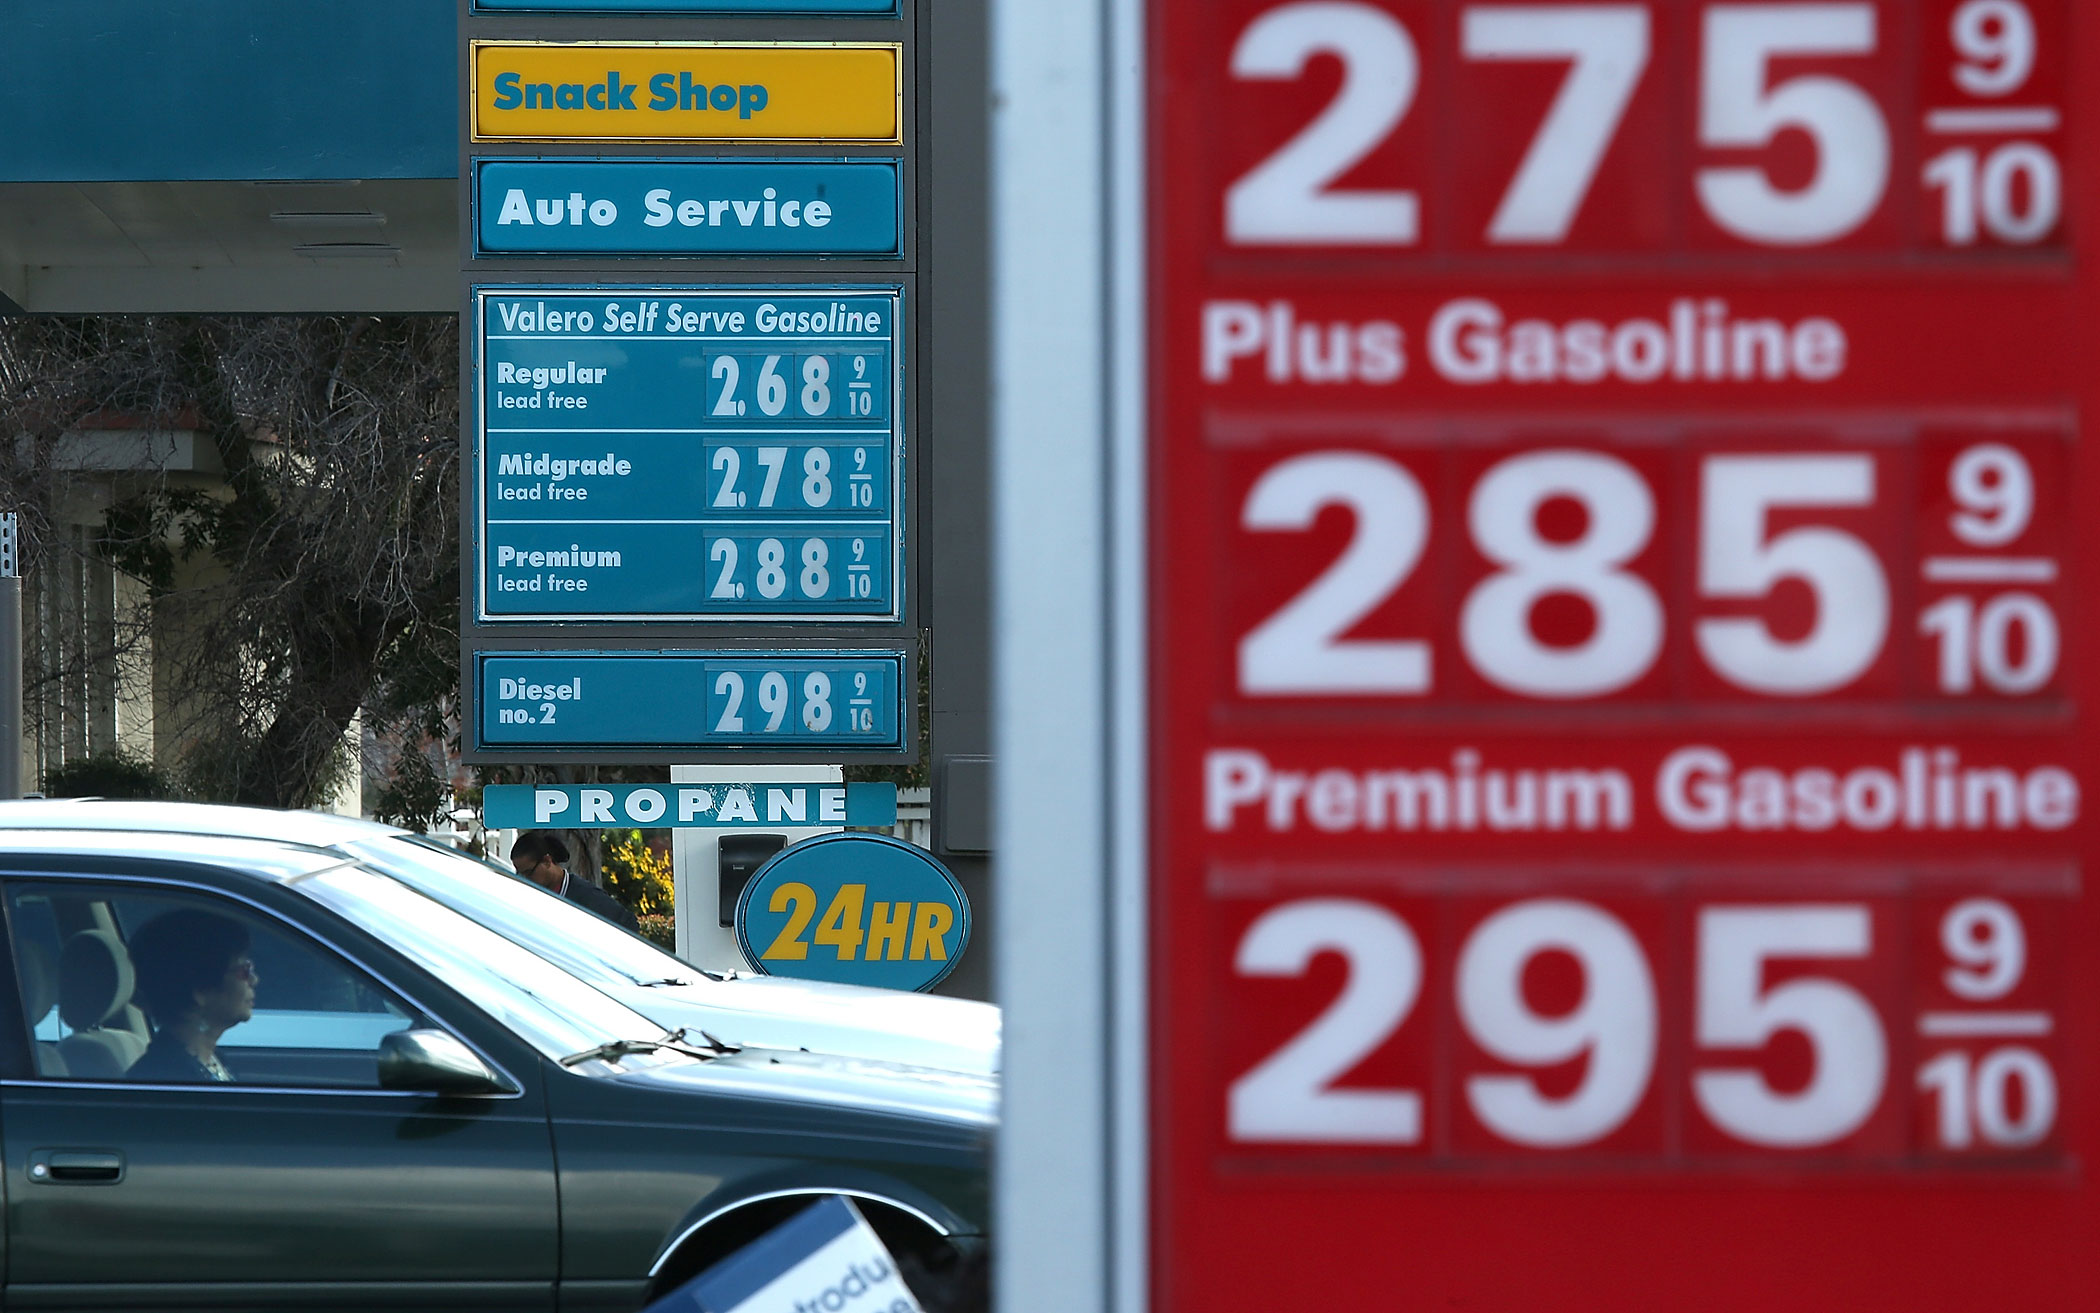 Drivers pass by gas prices that are displayed at Valero and 76 gas stations on Feb. 9, 2015 in San Rafael, Calif. (Justin Sullivan—Getty Images)